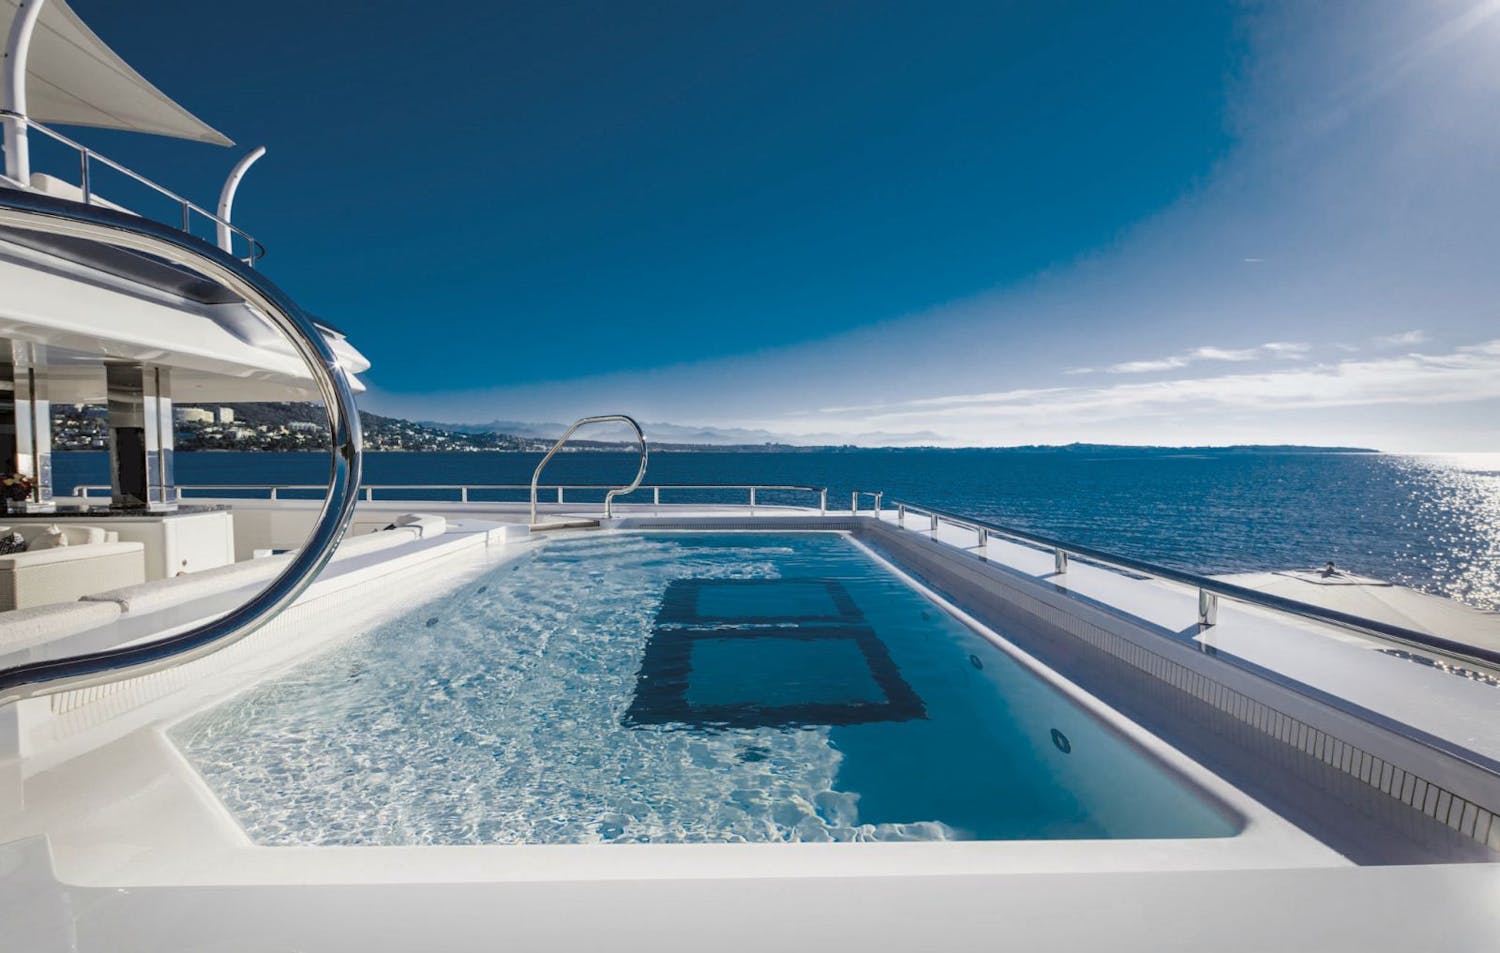 Long outdoor pool on the aft deck. >